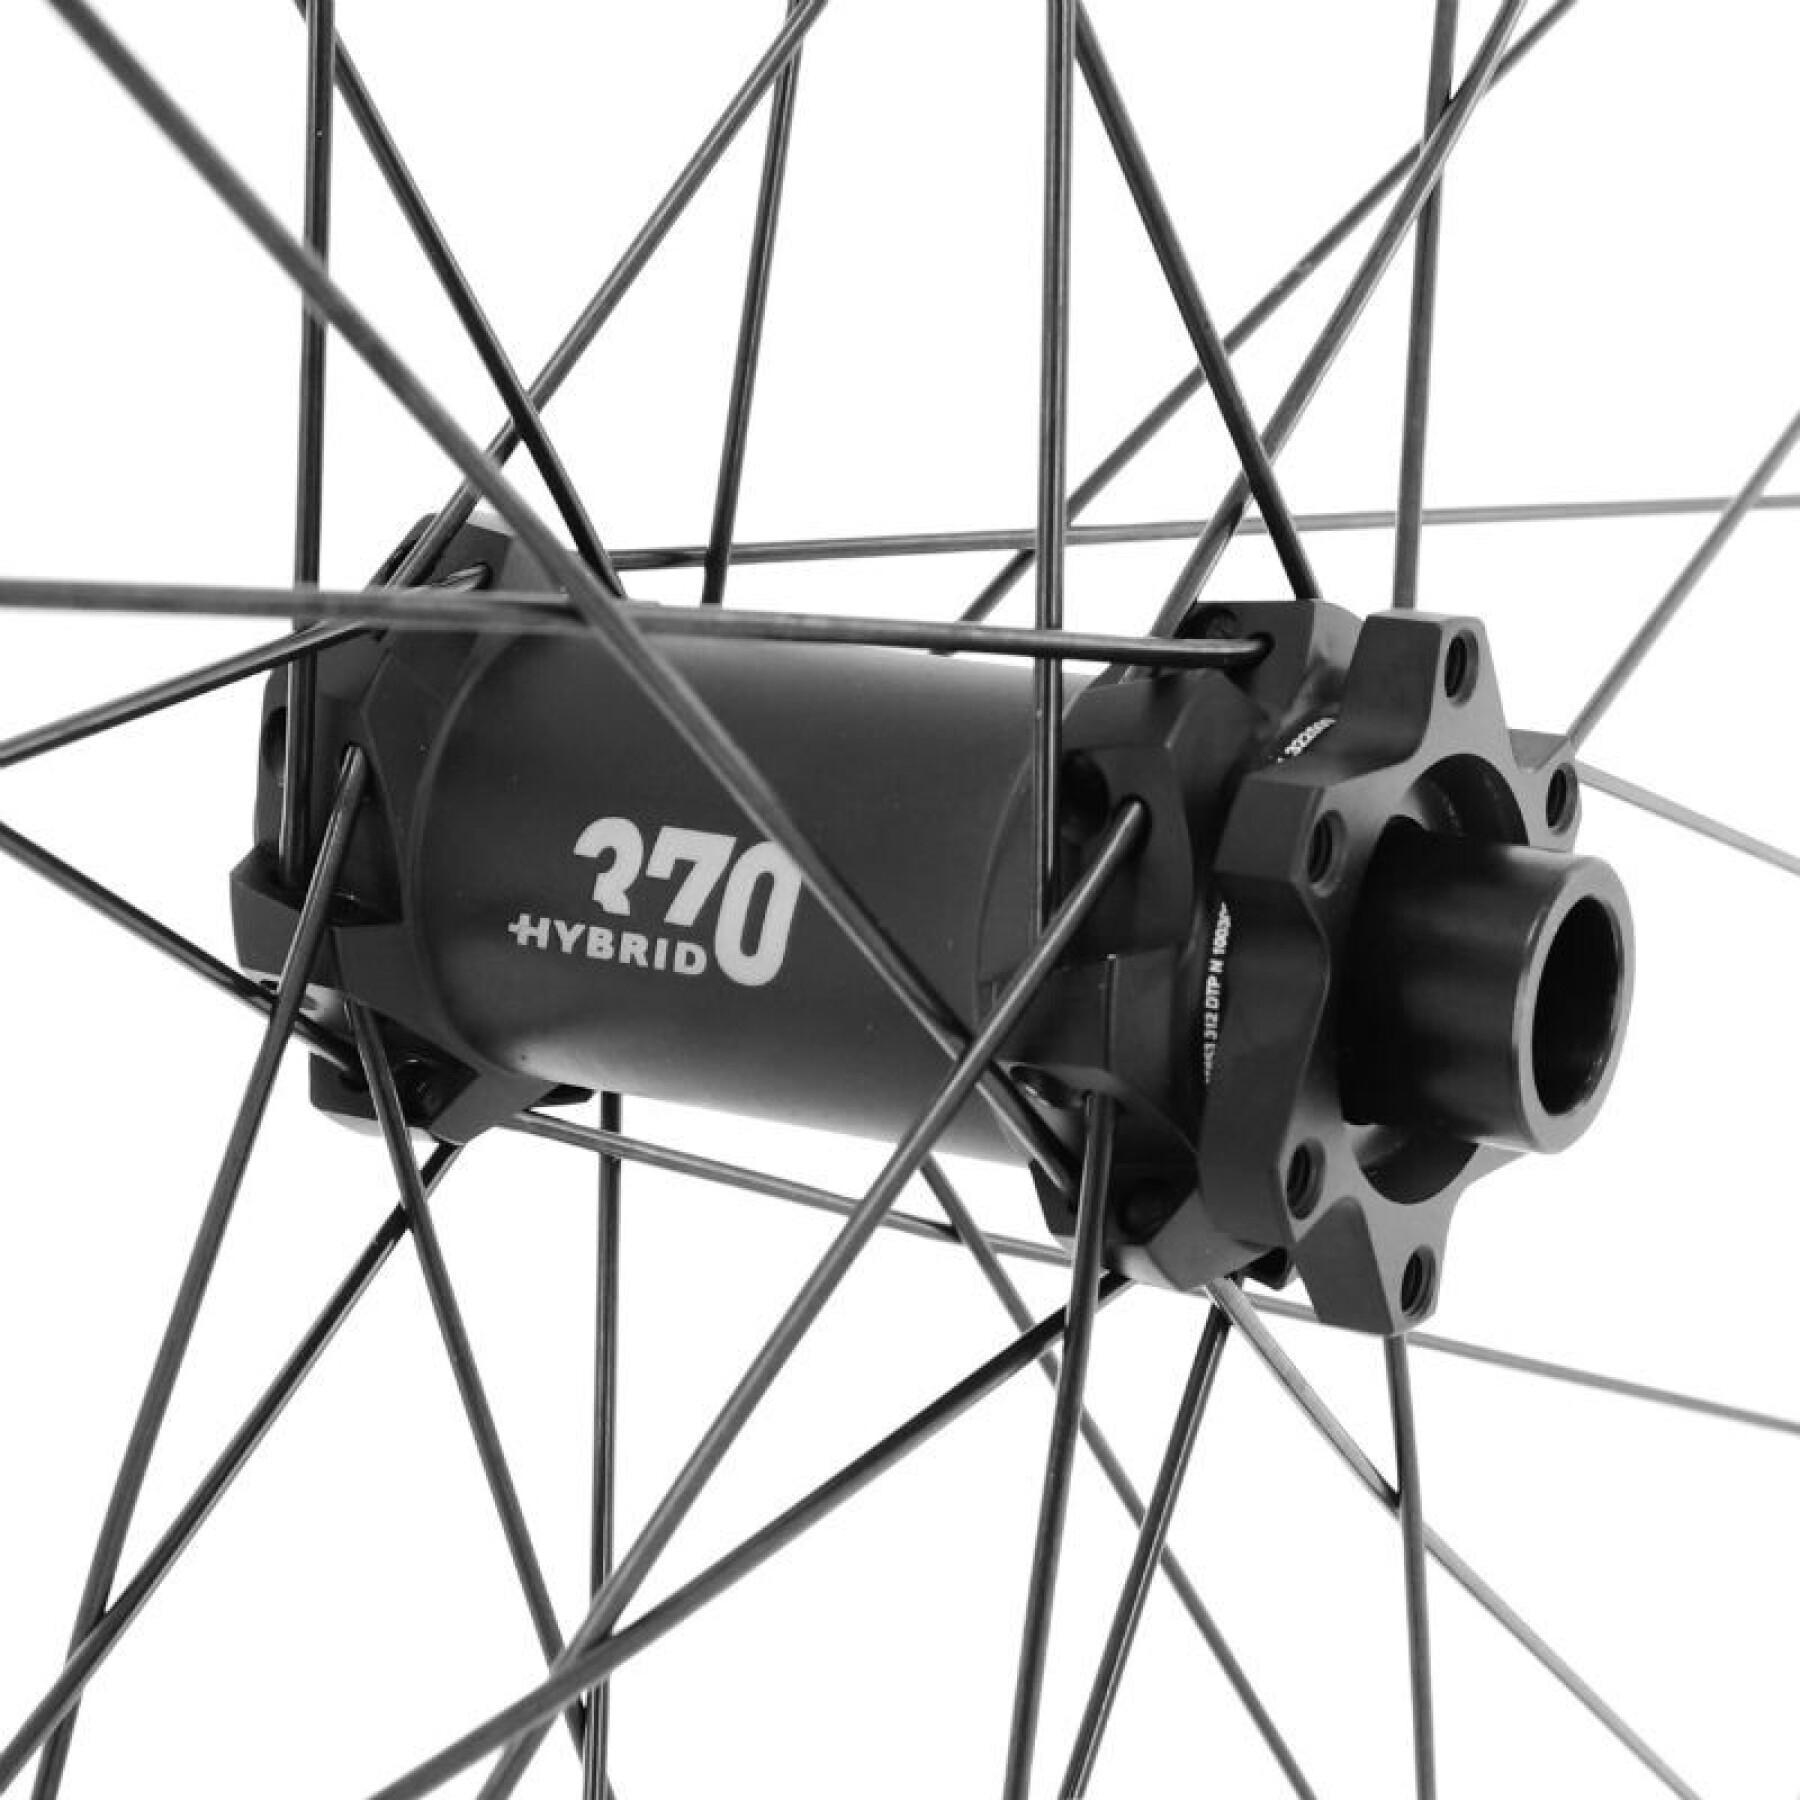 Tubeless front wheel through axle 6-hole disc DT Swiss H1900 BOOST